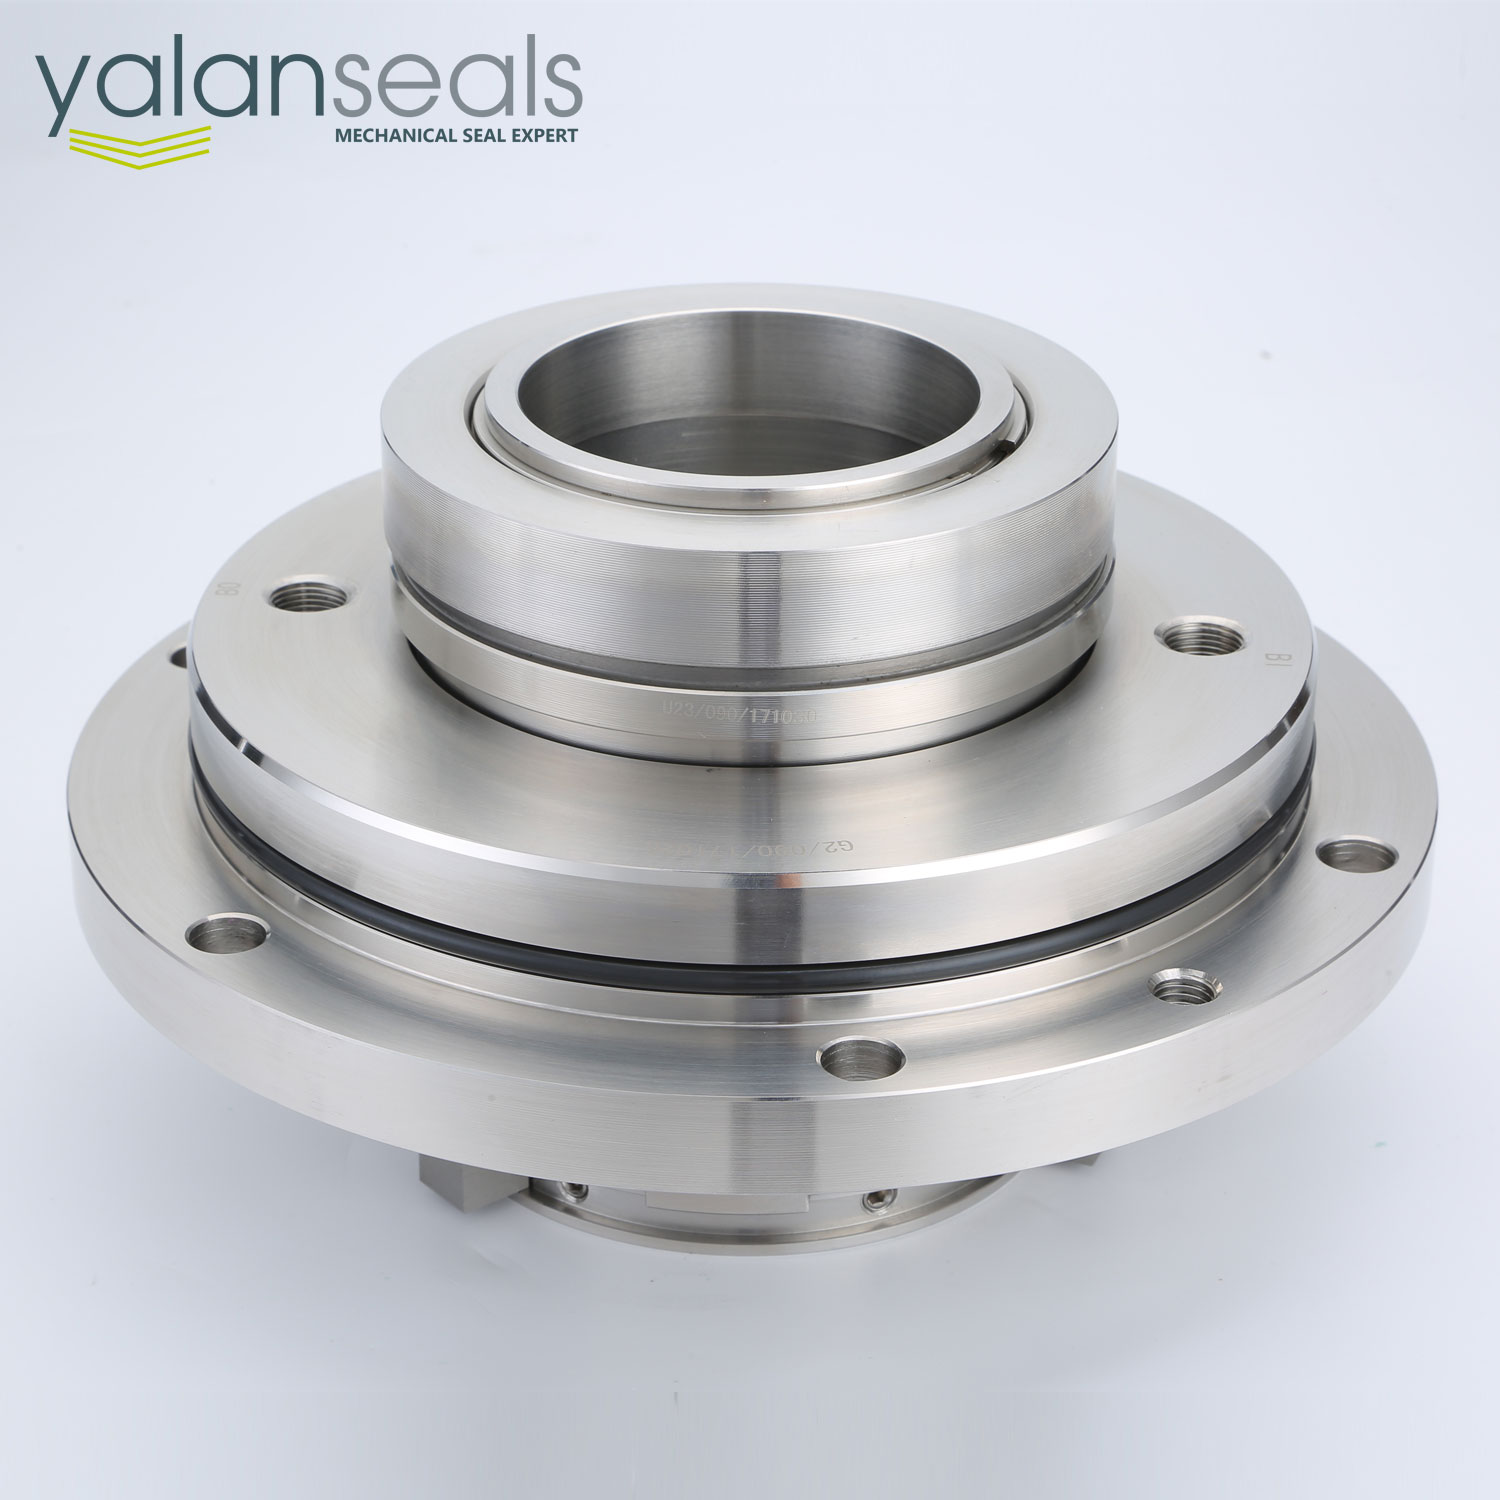 SAF Mechanical Seal for Paper-making Equipment and Pressure Screens (for paper pulp agitation)